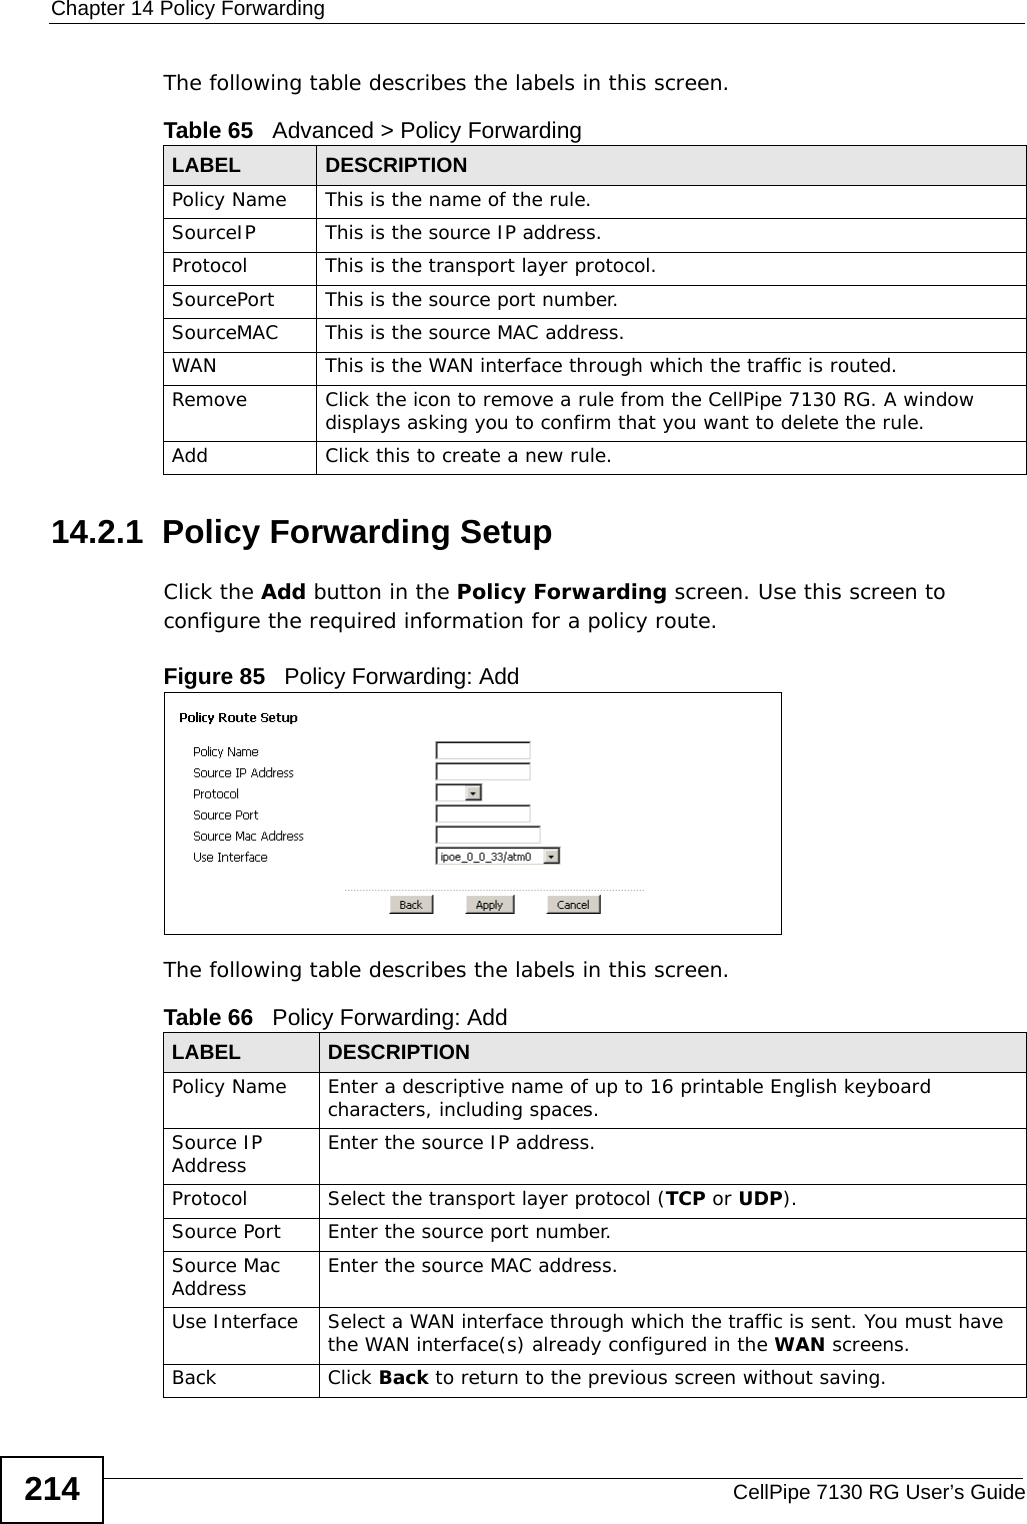 Chapter 14 Policy ForwardingCellPipe 7130 RG User’s Guide214The following table describes the labels in this screen. 14.2.1  Policy Forwarding Setup   Click the Add button in the Policy Forwarding screen. Use this screen to configure the required information for a policy route. Figure 85   Policy Forwarding: Add The following table describes the labels in this screen. Table 65   Advanced &gt; Policy ForwardingLABEL DESCRIPTIONPolicy Name This is the name of the rule.SourceIP This is the source IP address.Protocol This is the transport layer protocol.SourcePort This is the source port number.SourceMAC This is the source MAC address.WAN This is the WAN interface through which the traffic is routed. Remove Click the icon to remove a rule from the CellPipe 7130 RG. A window displays asking you to confirm that you want to delete the rule. Add Click this to create a new rule.Table 66   Policy Forwarding: AddLABEL DESCRIPTIONPolicy Name Enter a descriptive name of up to 16 printable English keyboard characters, including spaces. Source IP Address Enter the source IP address.Protocol Select the transport layer protocol (TCP or UDP).Source Port Enter the source port number. Source Mac Address Enter the source MAC address. Use Interface Select a WAN interface through which the traffic is sent. You must have the WAN interface(s) already configured in the WAN screens.Back Click Back to return to the previous screen without saving.